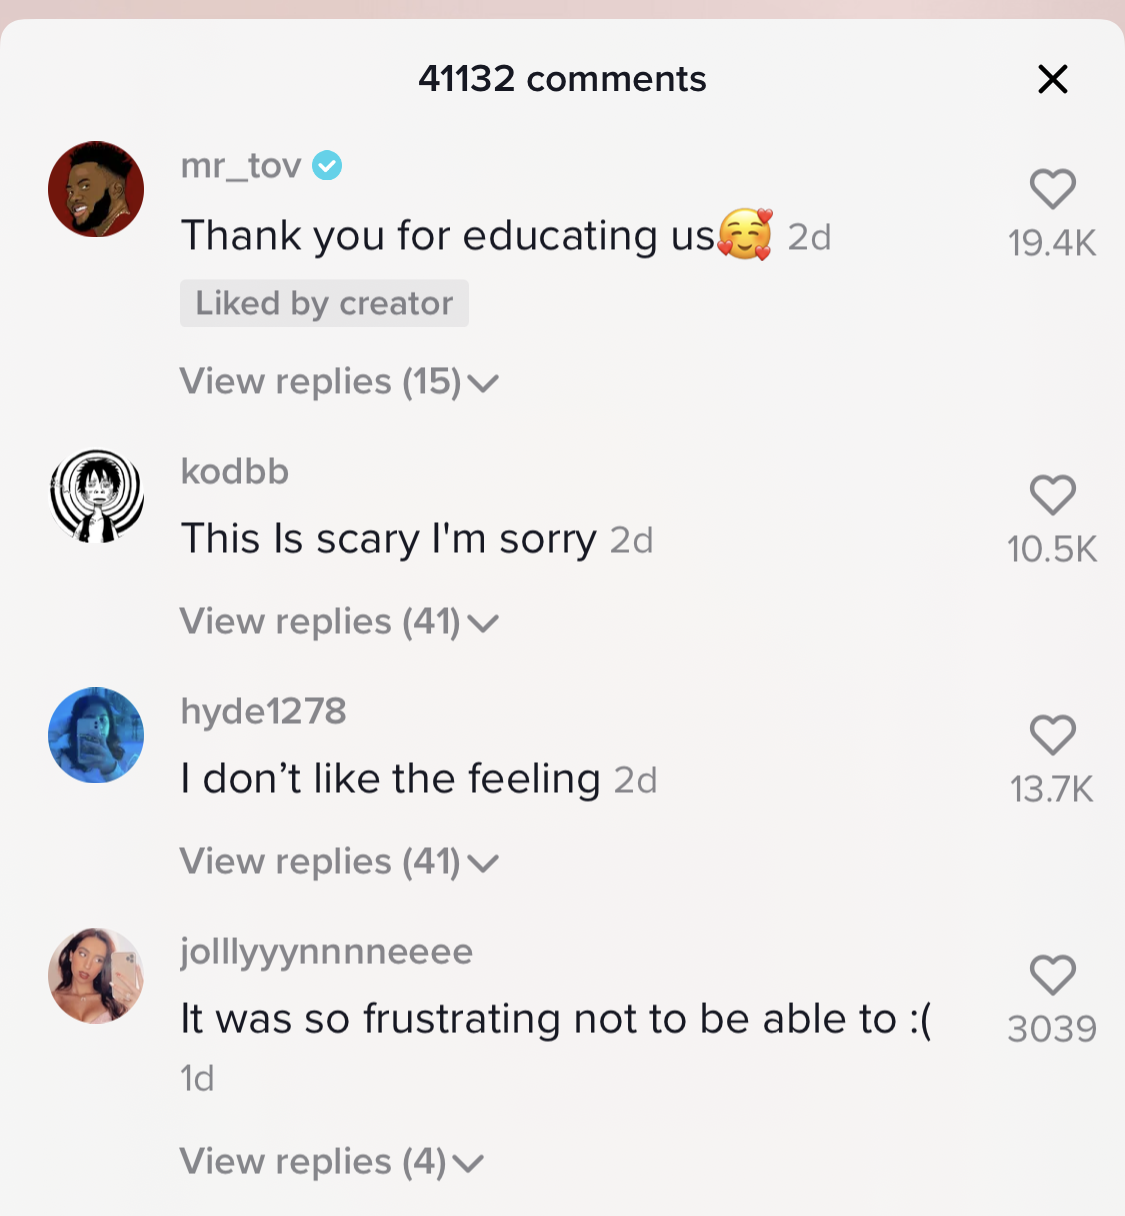 Comments saying &quot;I don&#x27;t like the feeling&quot; and &quot;this is scary, I&#x27;m sorry.&quot;